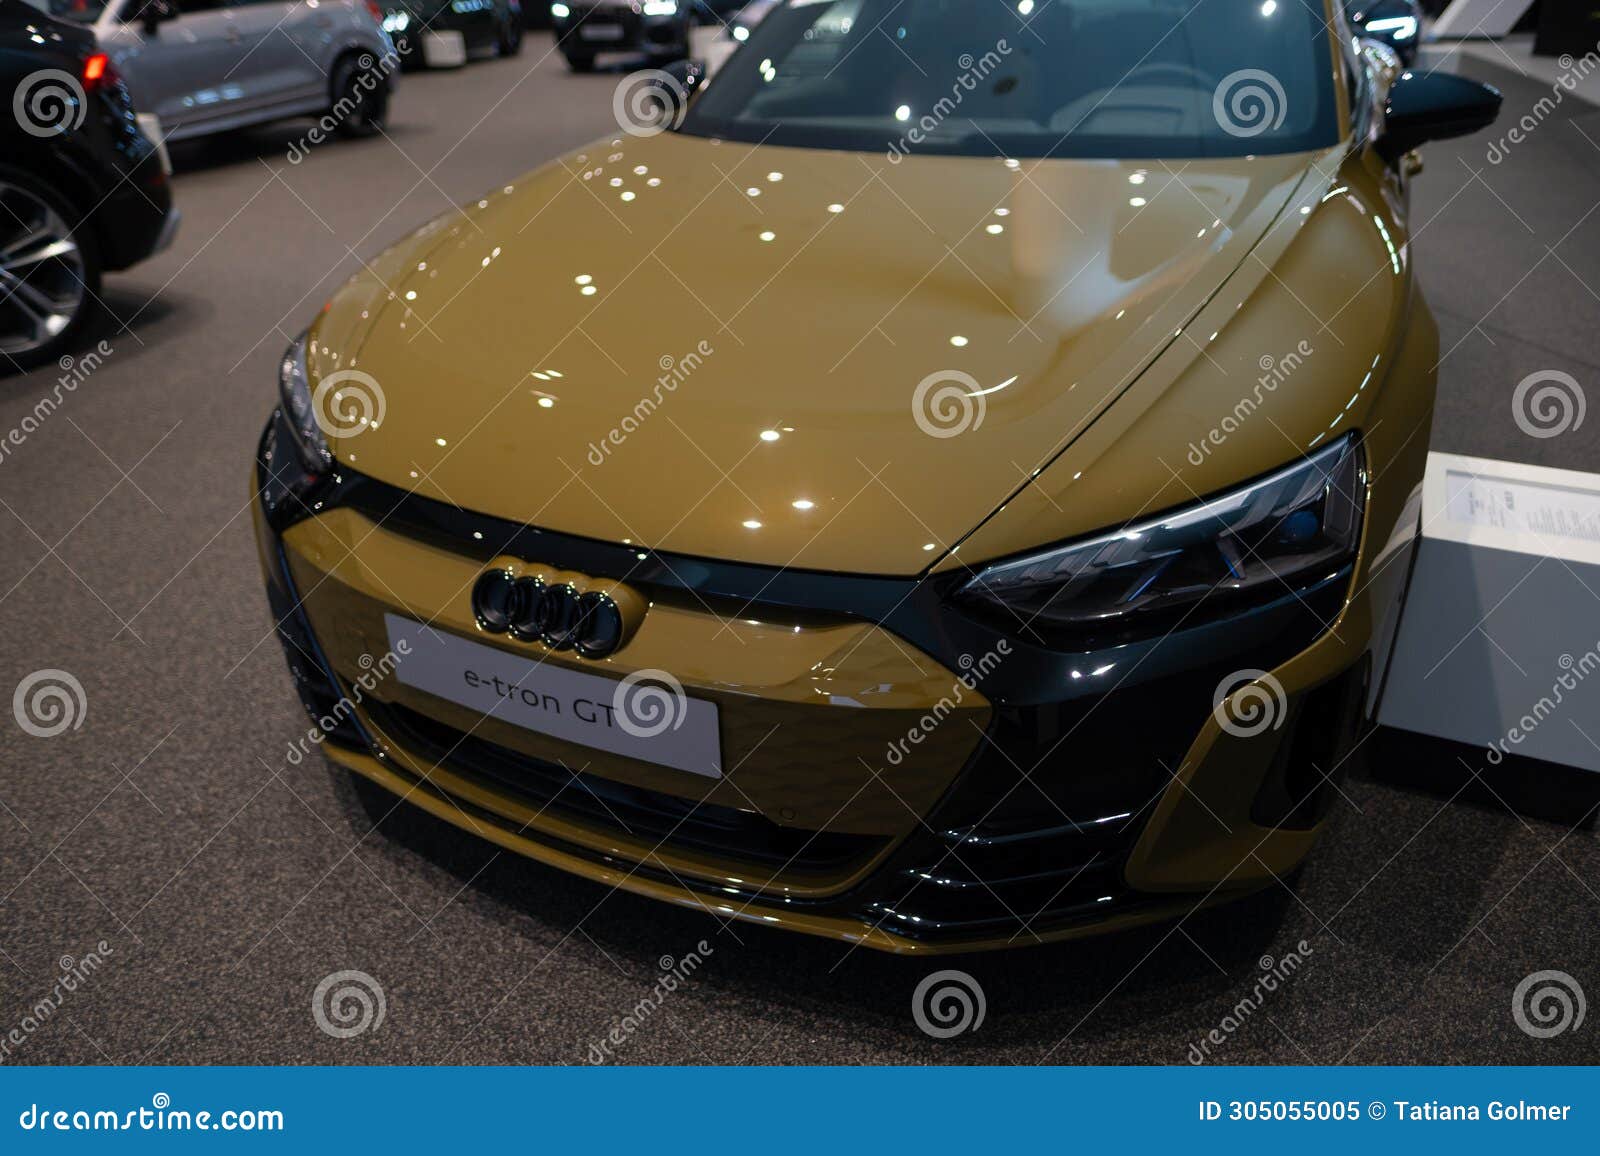 126 Audi Tron Gt Stock Photos - Free & Royalty-Free Stock Photos from  Dreamstime